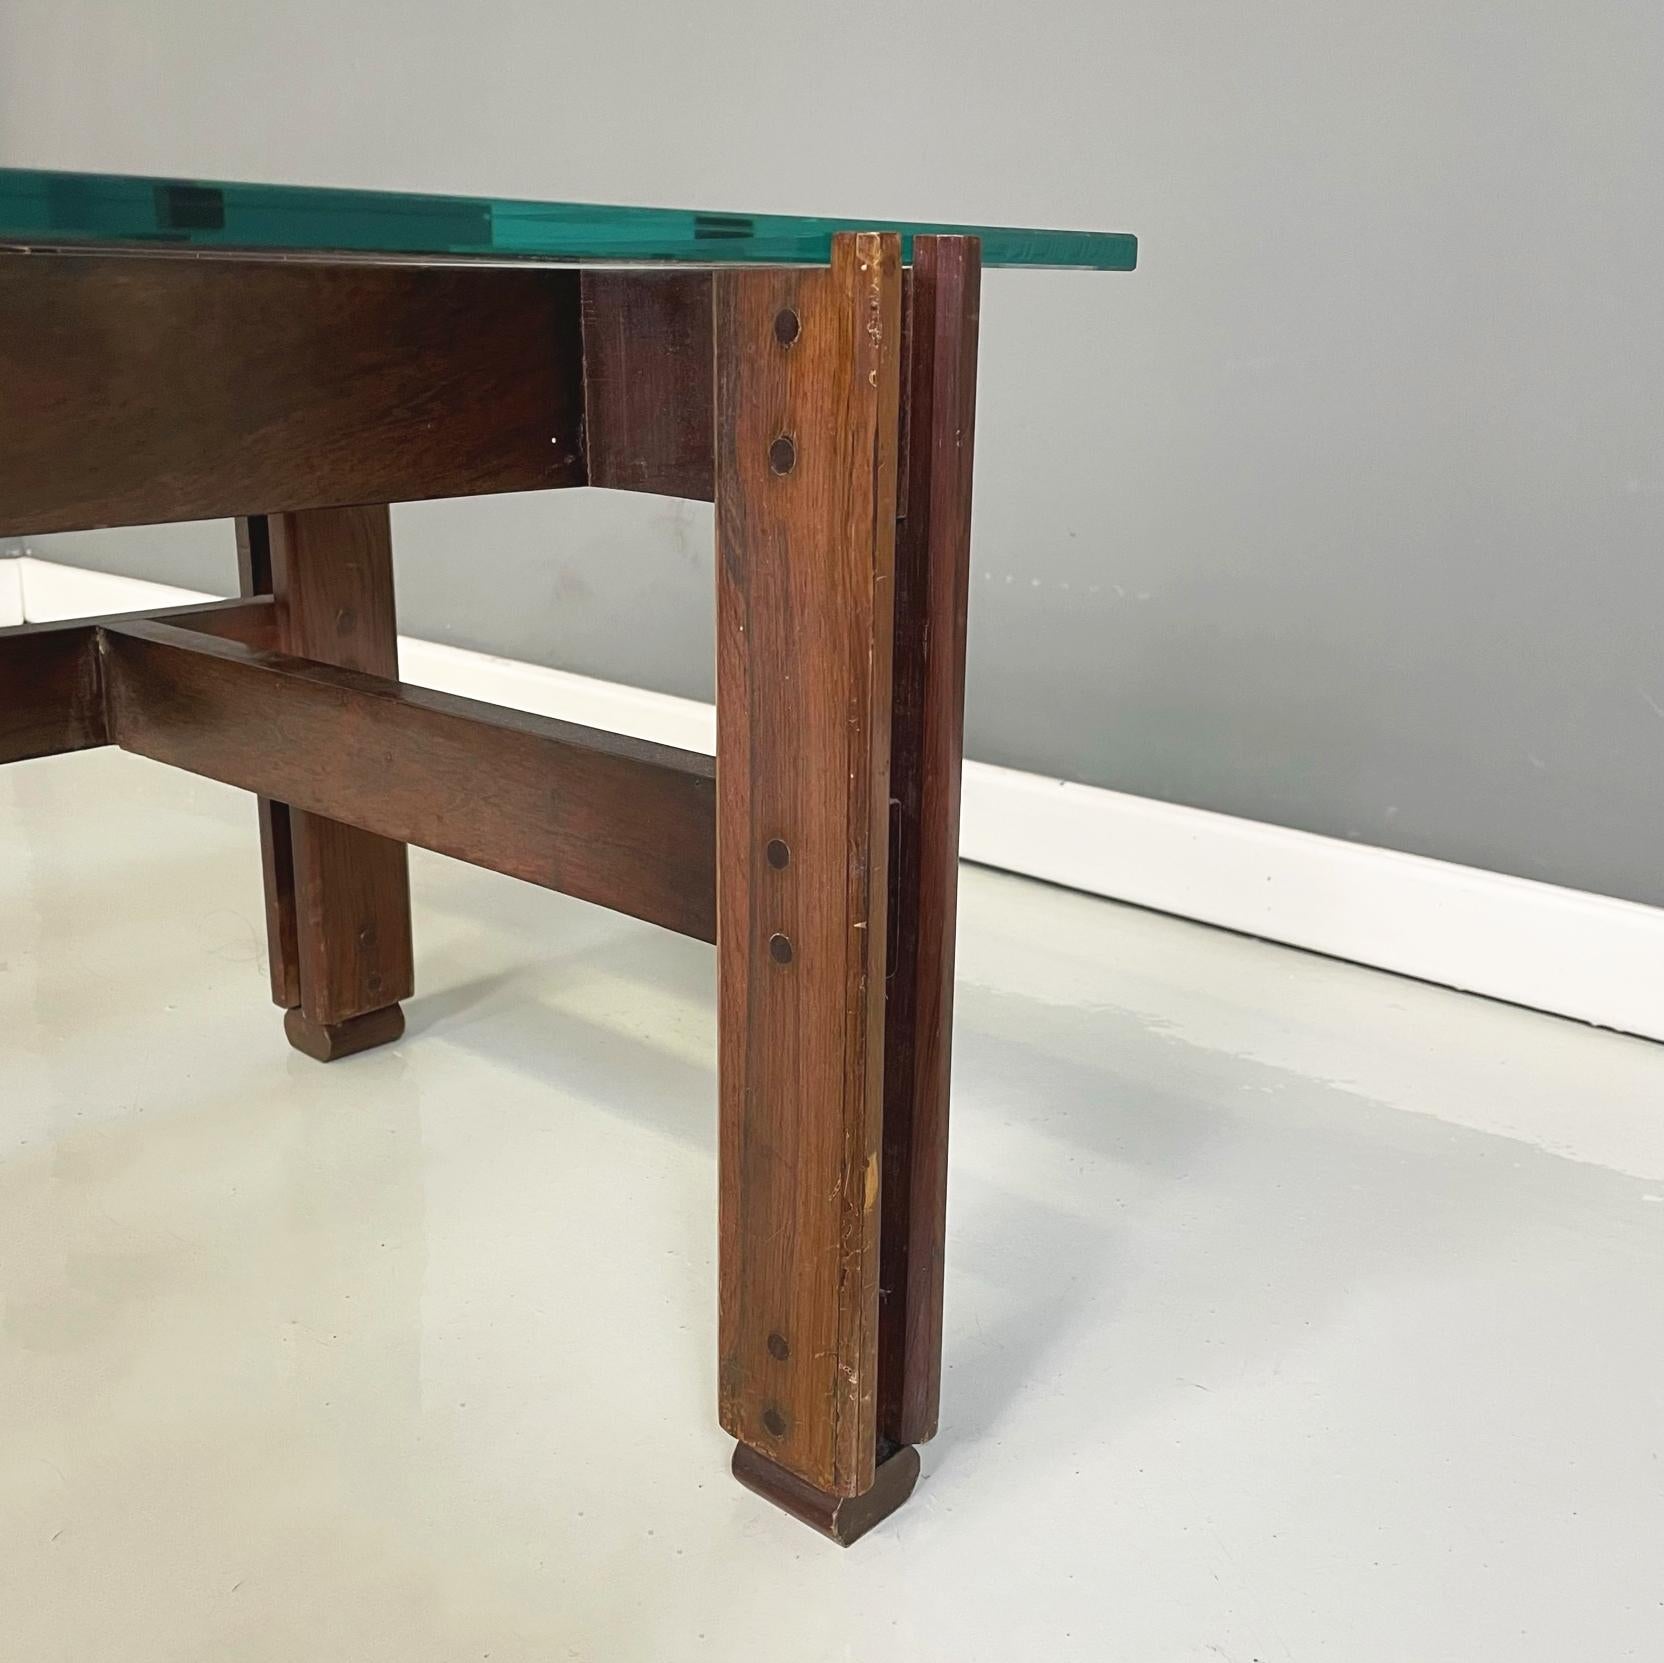 Italian Mid-Century Coffee Table 751 by Ico and Luisa Parisi for Cassina, 1960s For Sale 3